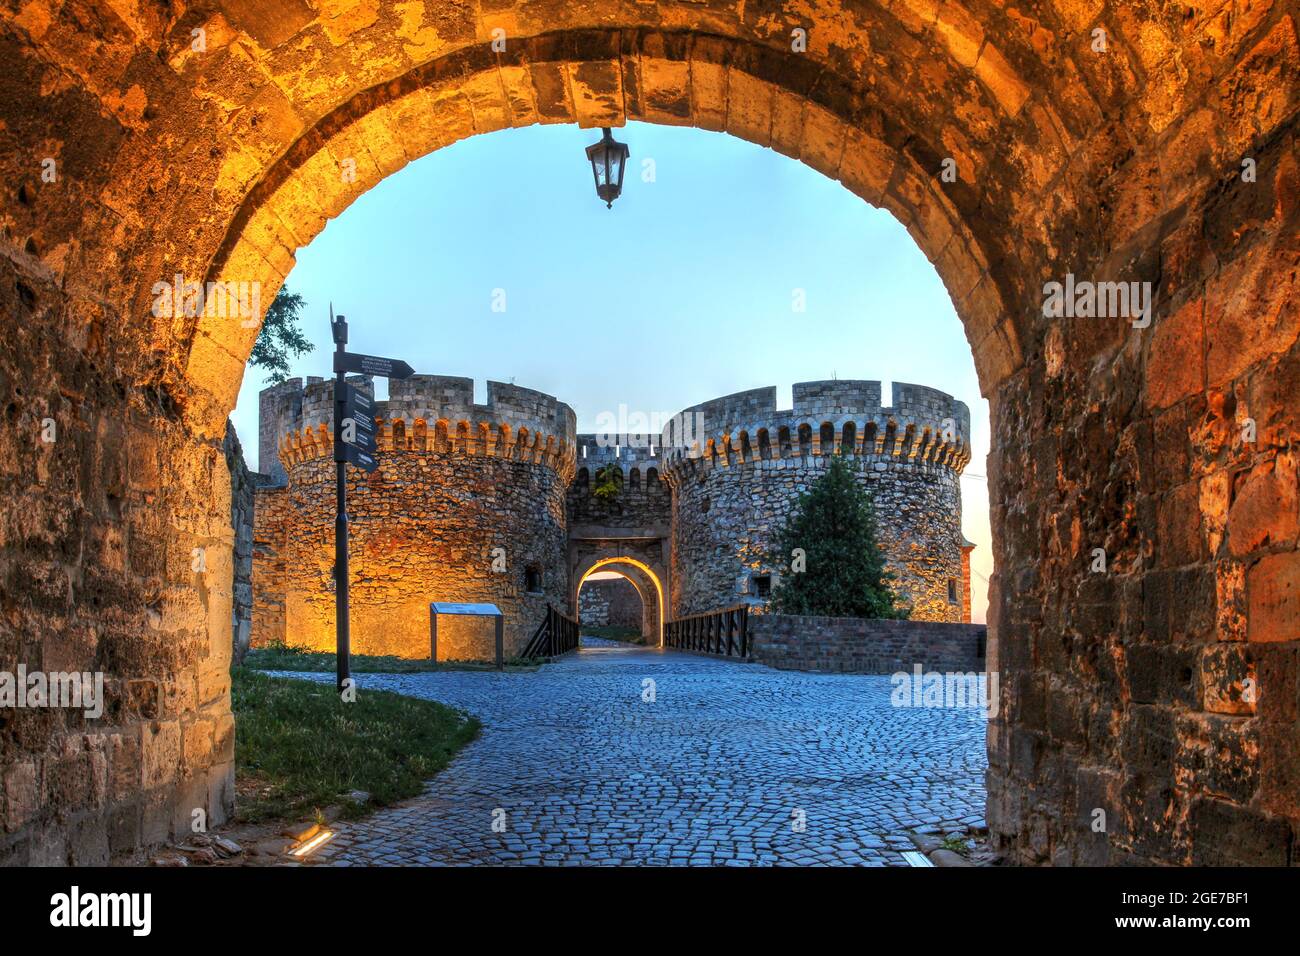 Night scene in Kalemegdan a large parc over the ruins of Belgrade fortress, Serbia featuring the Zindan Gate as seen from Leopold's Gate at sunset. Stock Photo